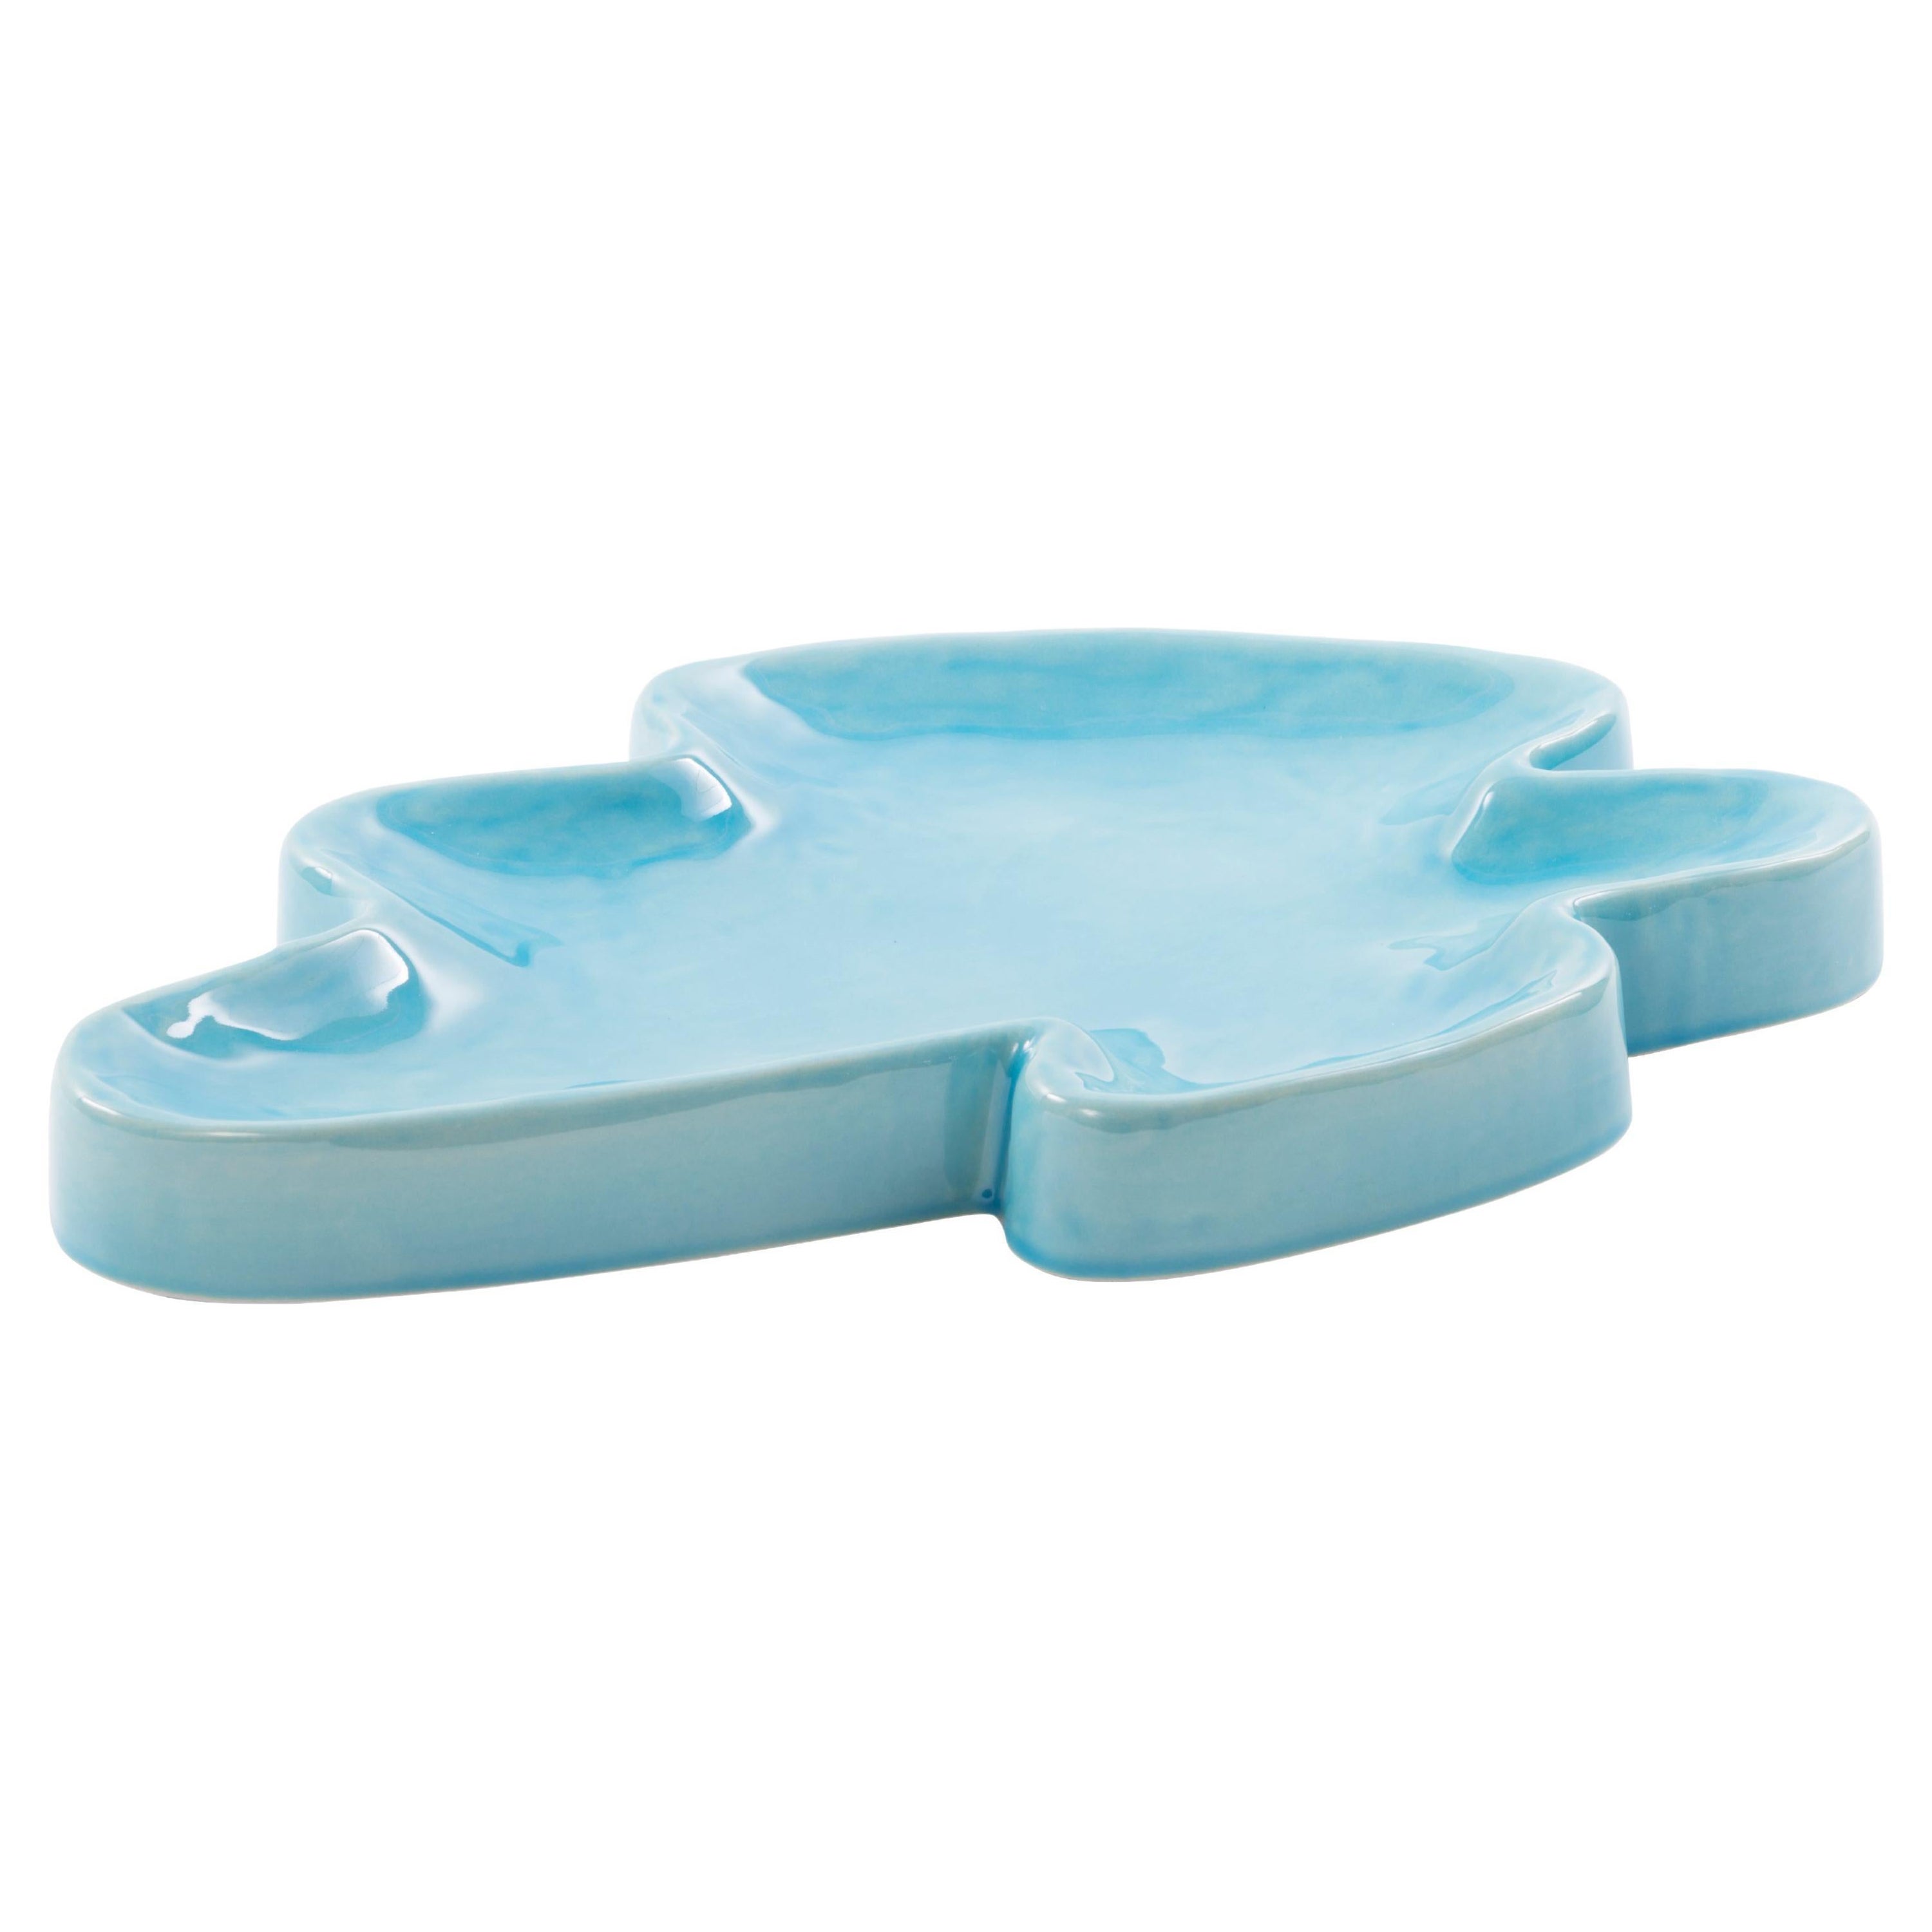 Lake Big Tropical Turquoise Tray by Pulpo For Sale